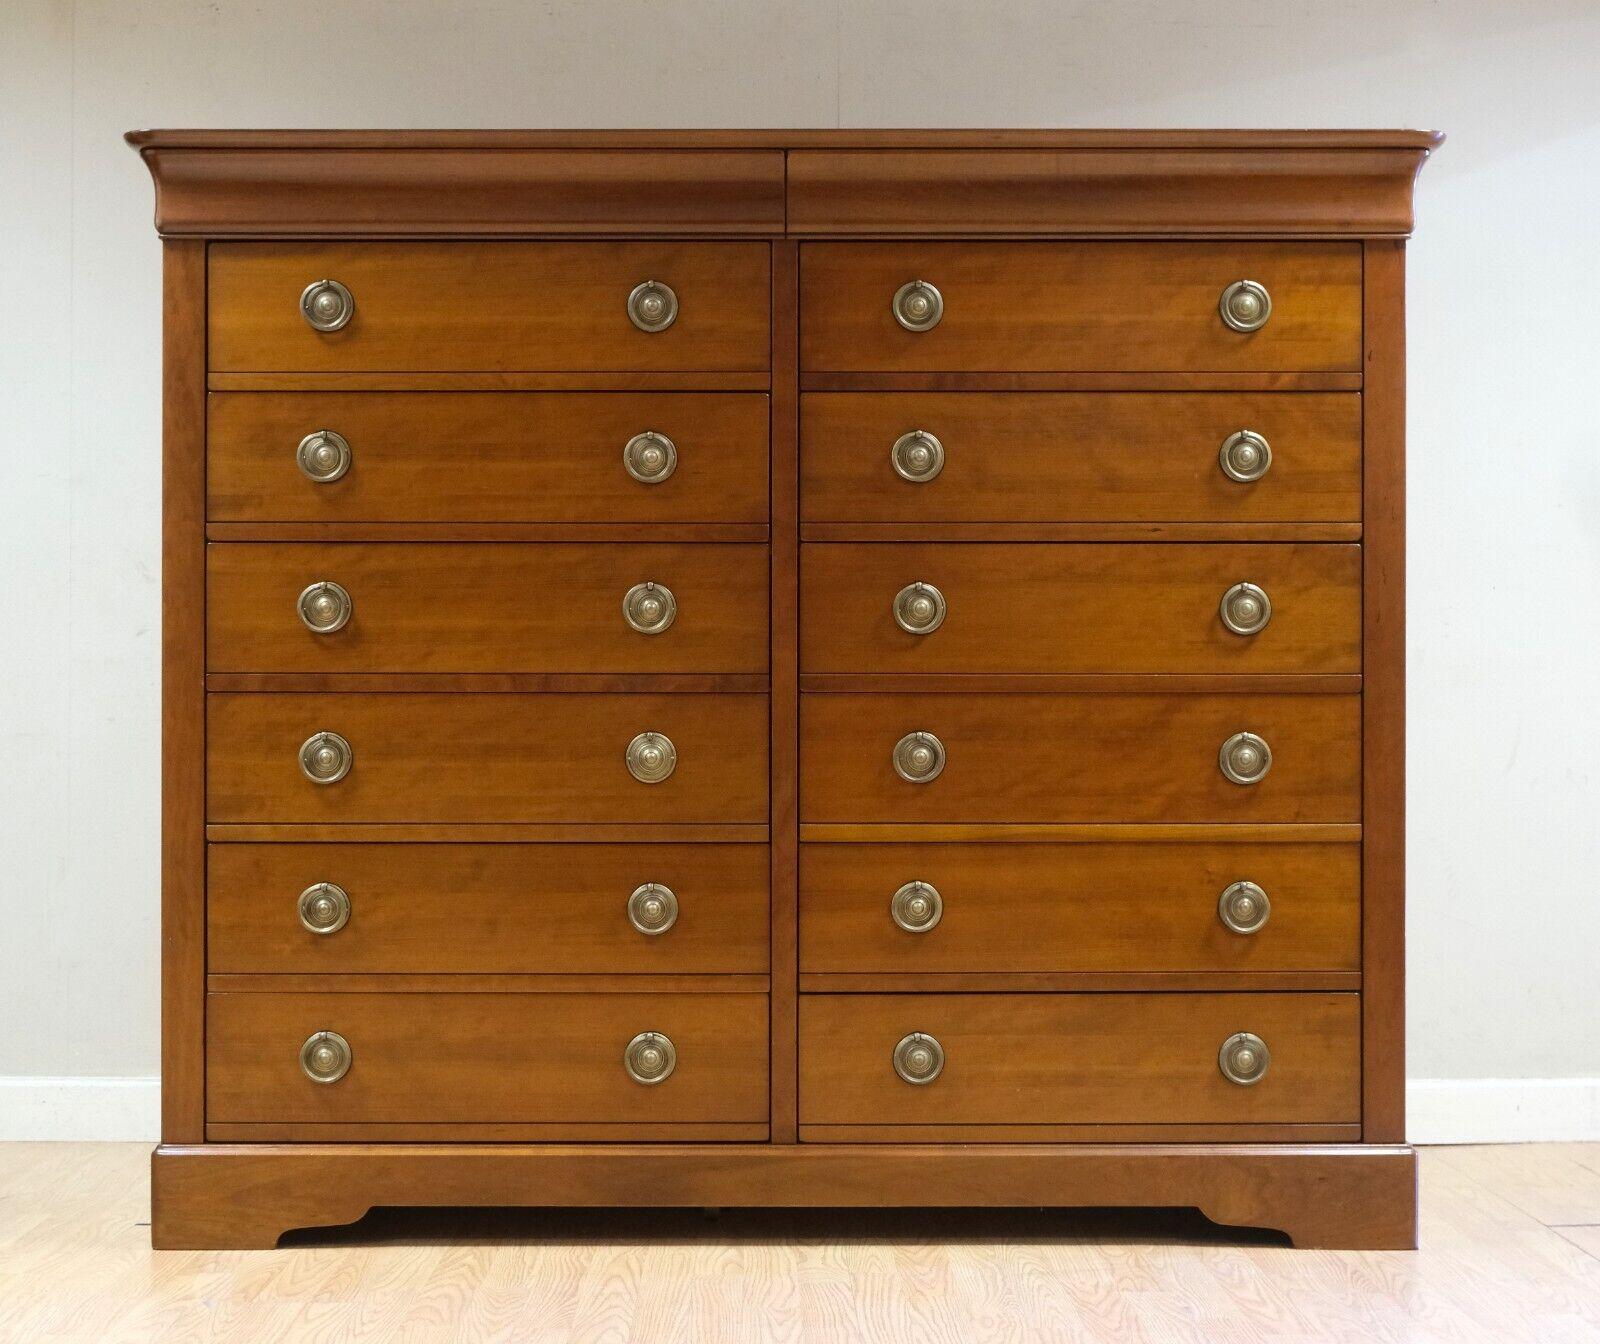 We are delighted to offer for sale this stunning Grange brown Cherry wood tall chest of drawers on plinth base.

This well made, sturdy, and simple but yet stunning chest of drawers speaks for itself about good quality and perfect design. The